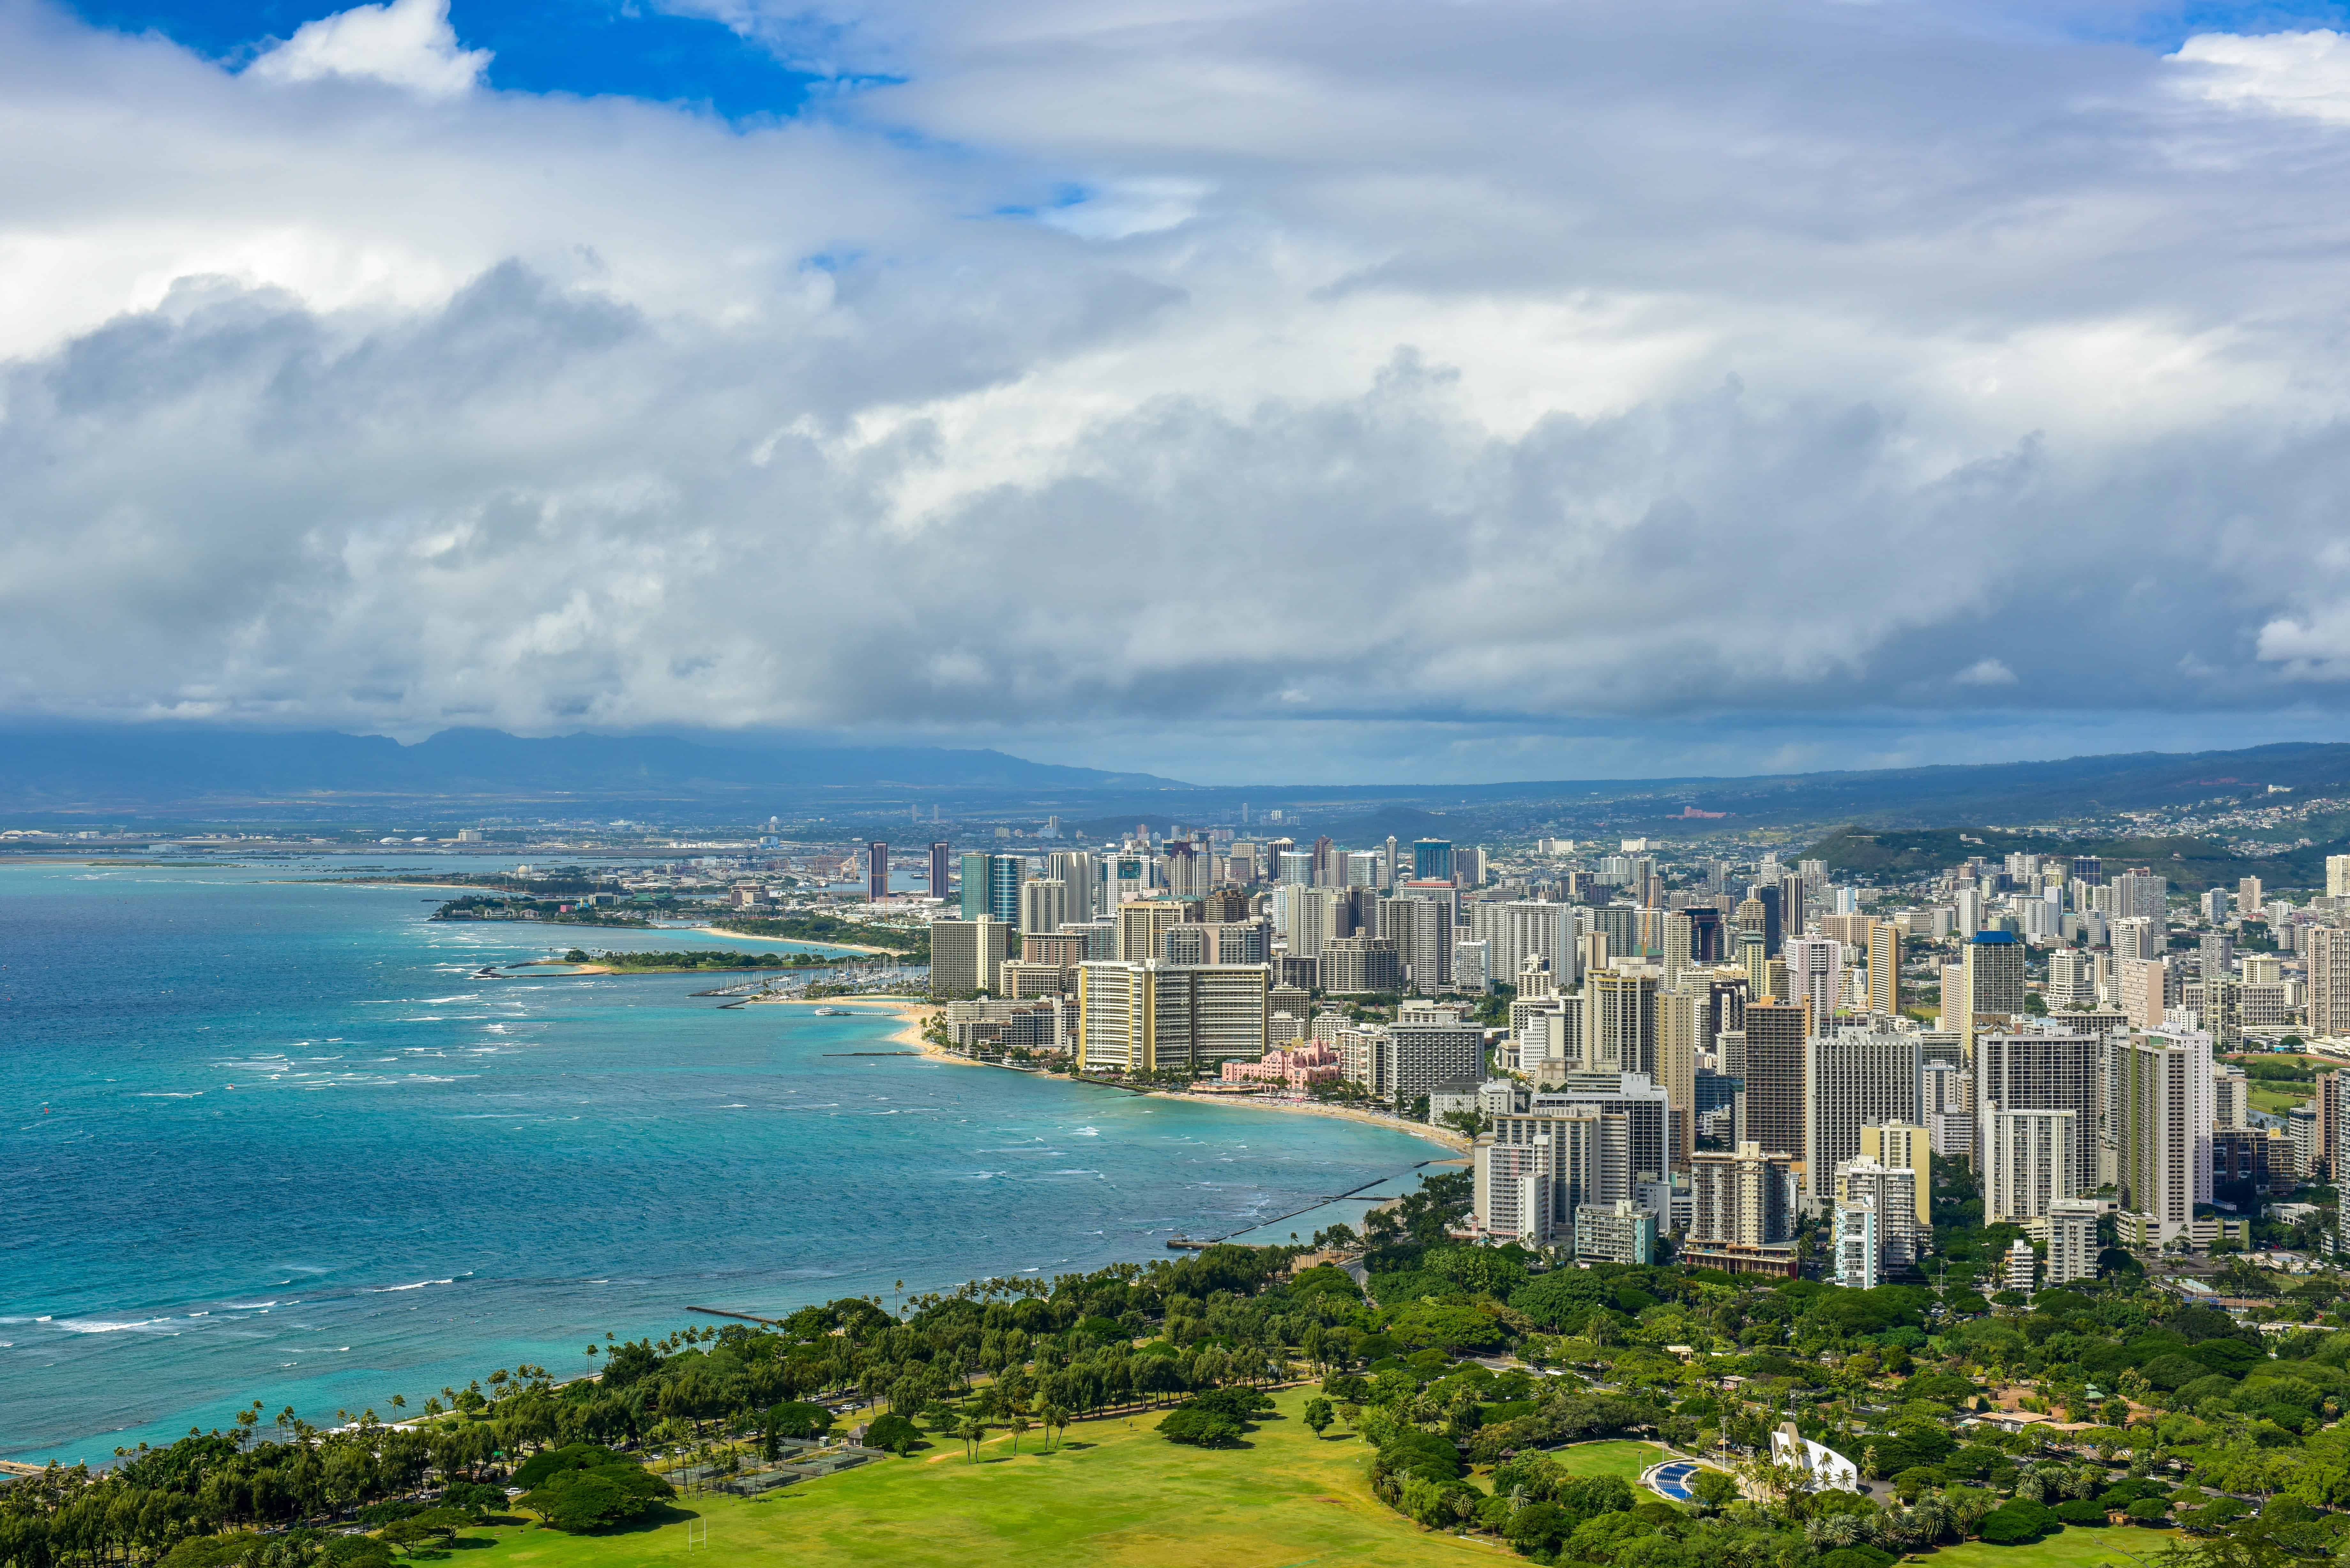 Discover Honolulu Hawaii: A 5 Day Itinerary for First Time Visitors